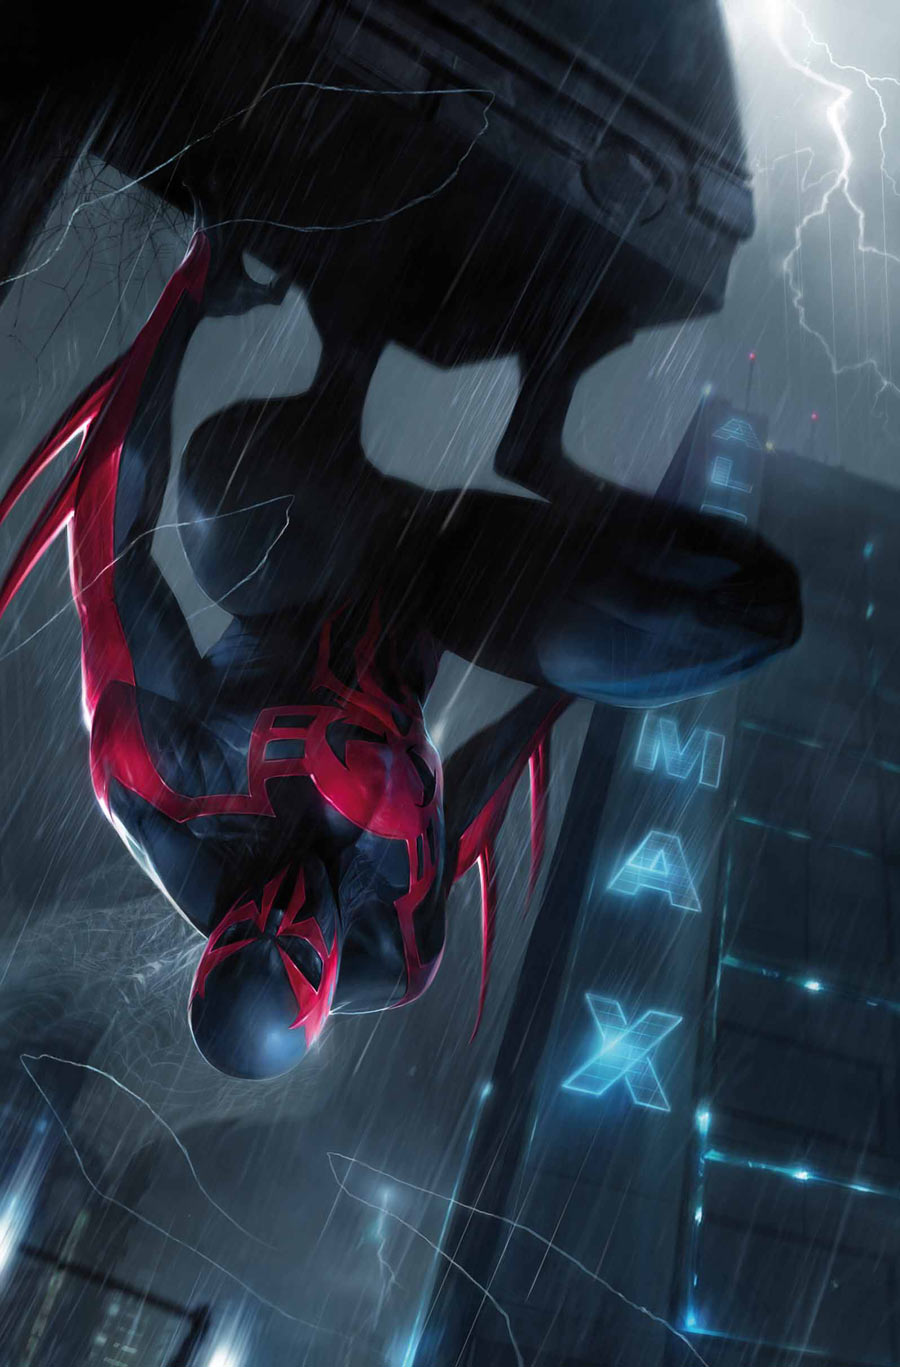 Spider Man 2099 screenshots, images and pictures - Comic Vine